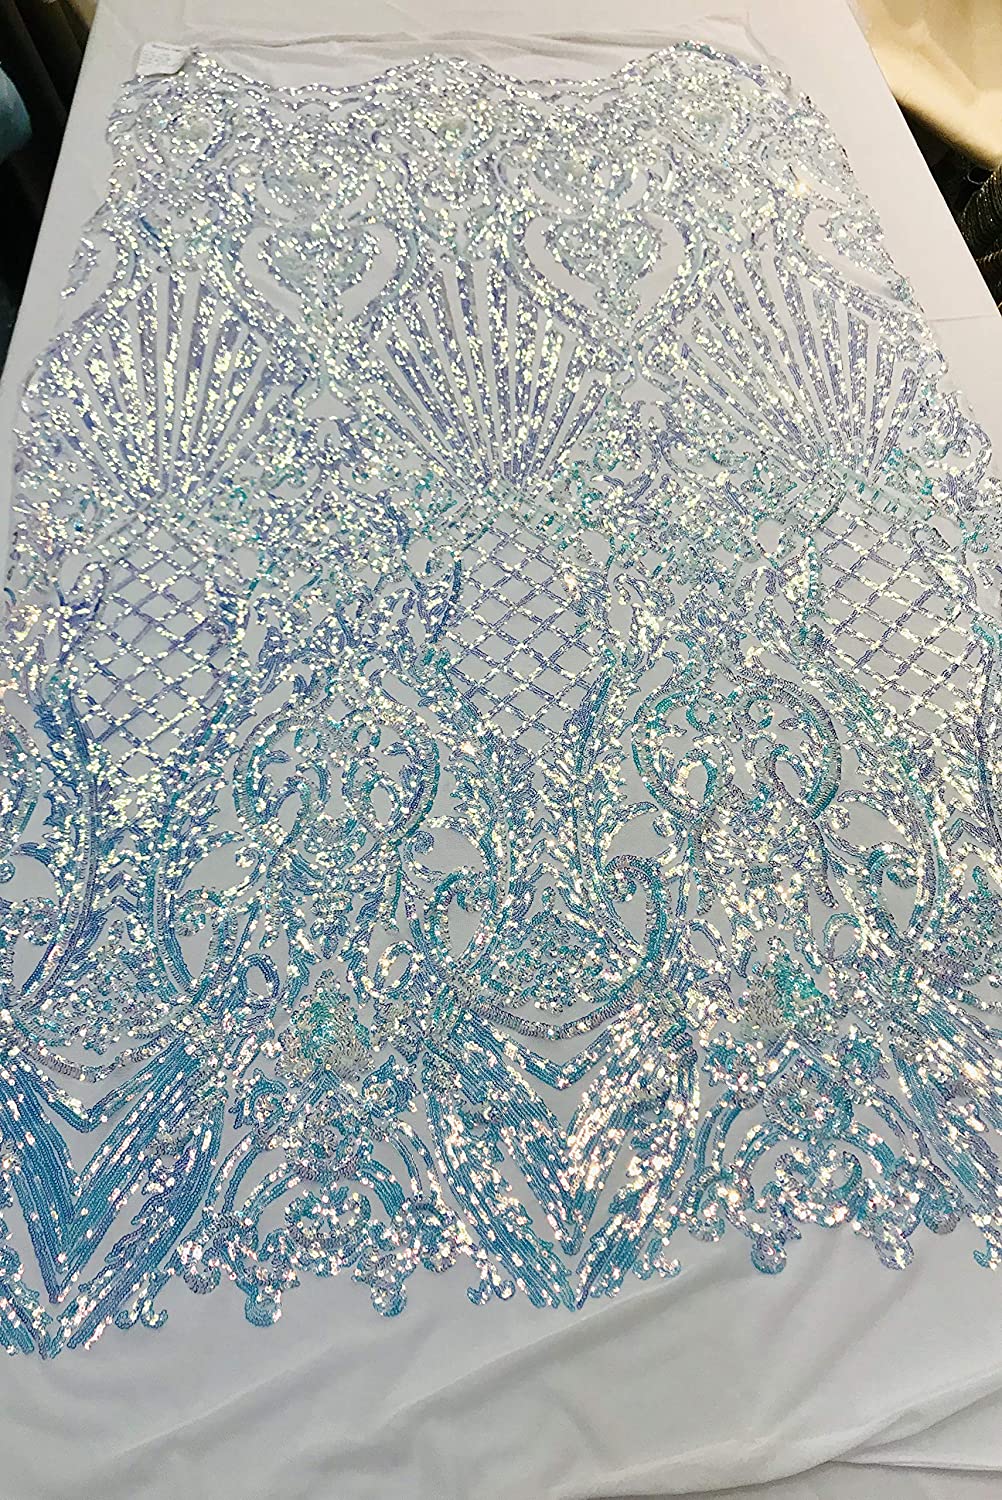 Damask Sequins Design on a 4 Way Stretch Mesh Fabric - for Night Gowns - Prom Dresses - (Aqua Iridescent on White, 1 Yard)